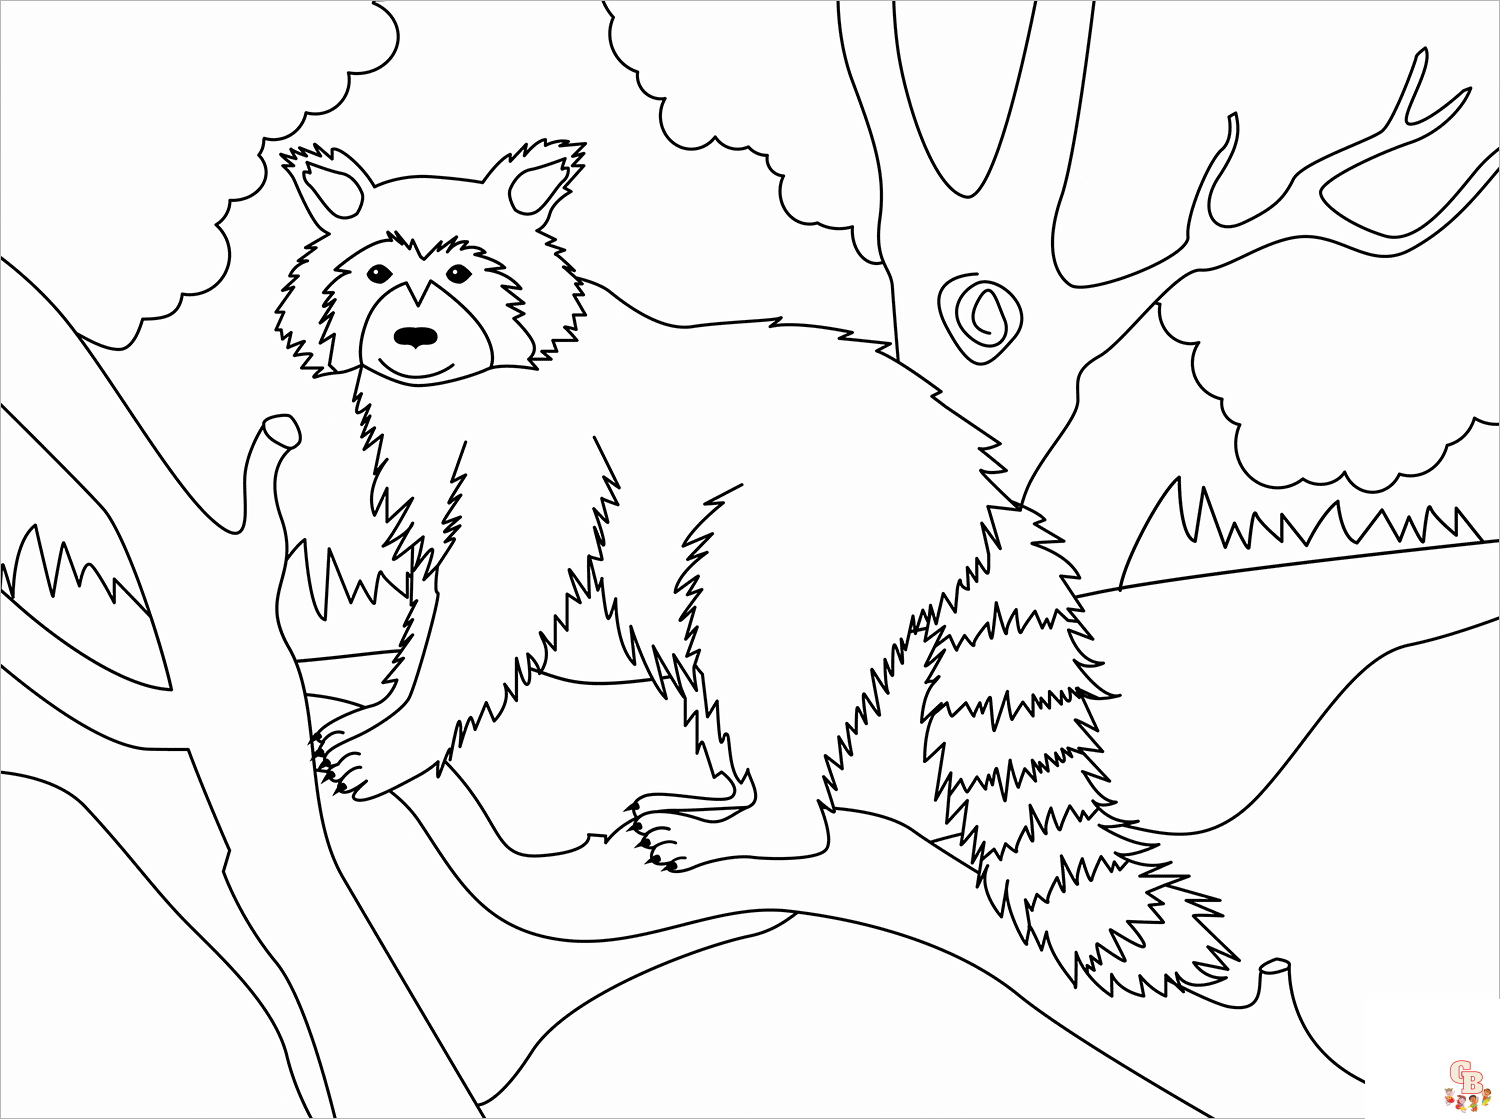 Cute Raccoon Coloring Pages 4